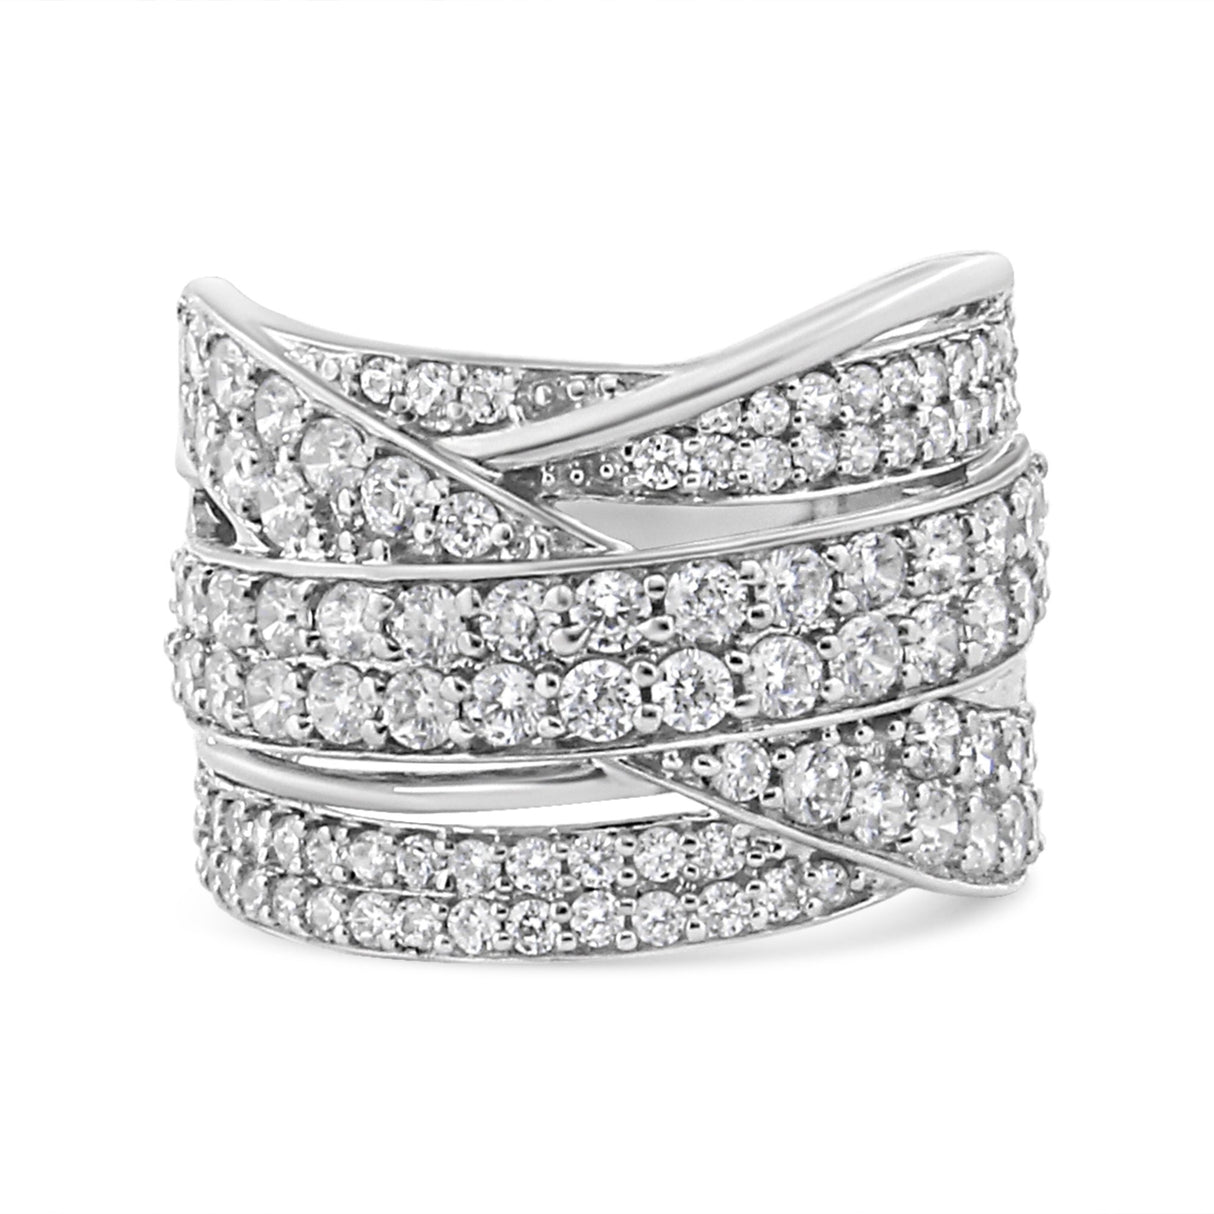 .925 Sterling Silver 2.00 Cttw Round-Cut Diamond Overlapping Bypass Band Ring (I-J Color, I2-I3 Clarity) - Ring Size 7 - Tuesday Morning-Rings